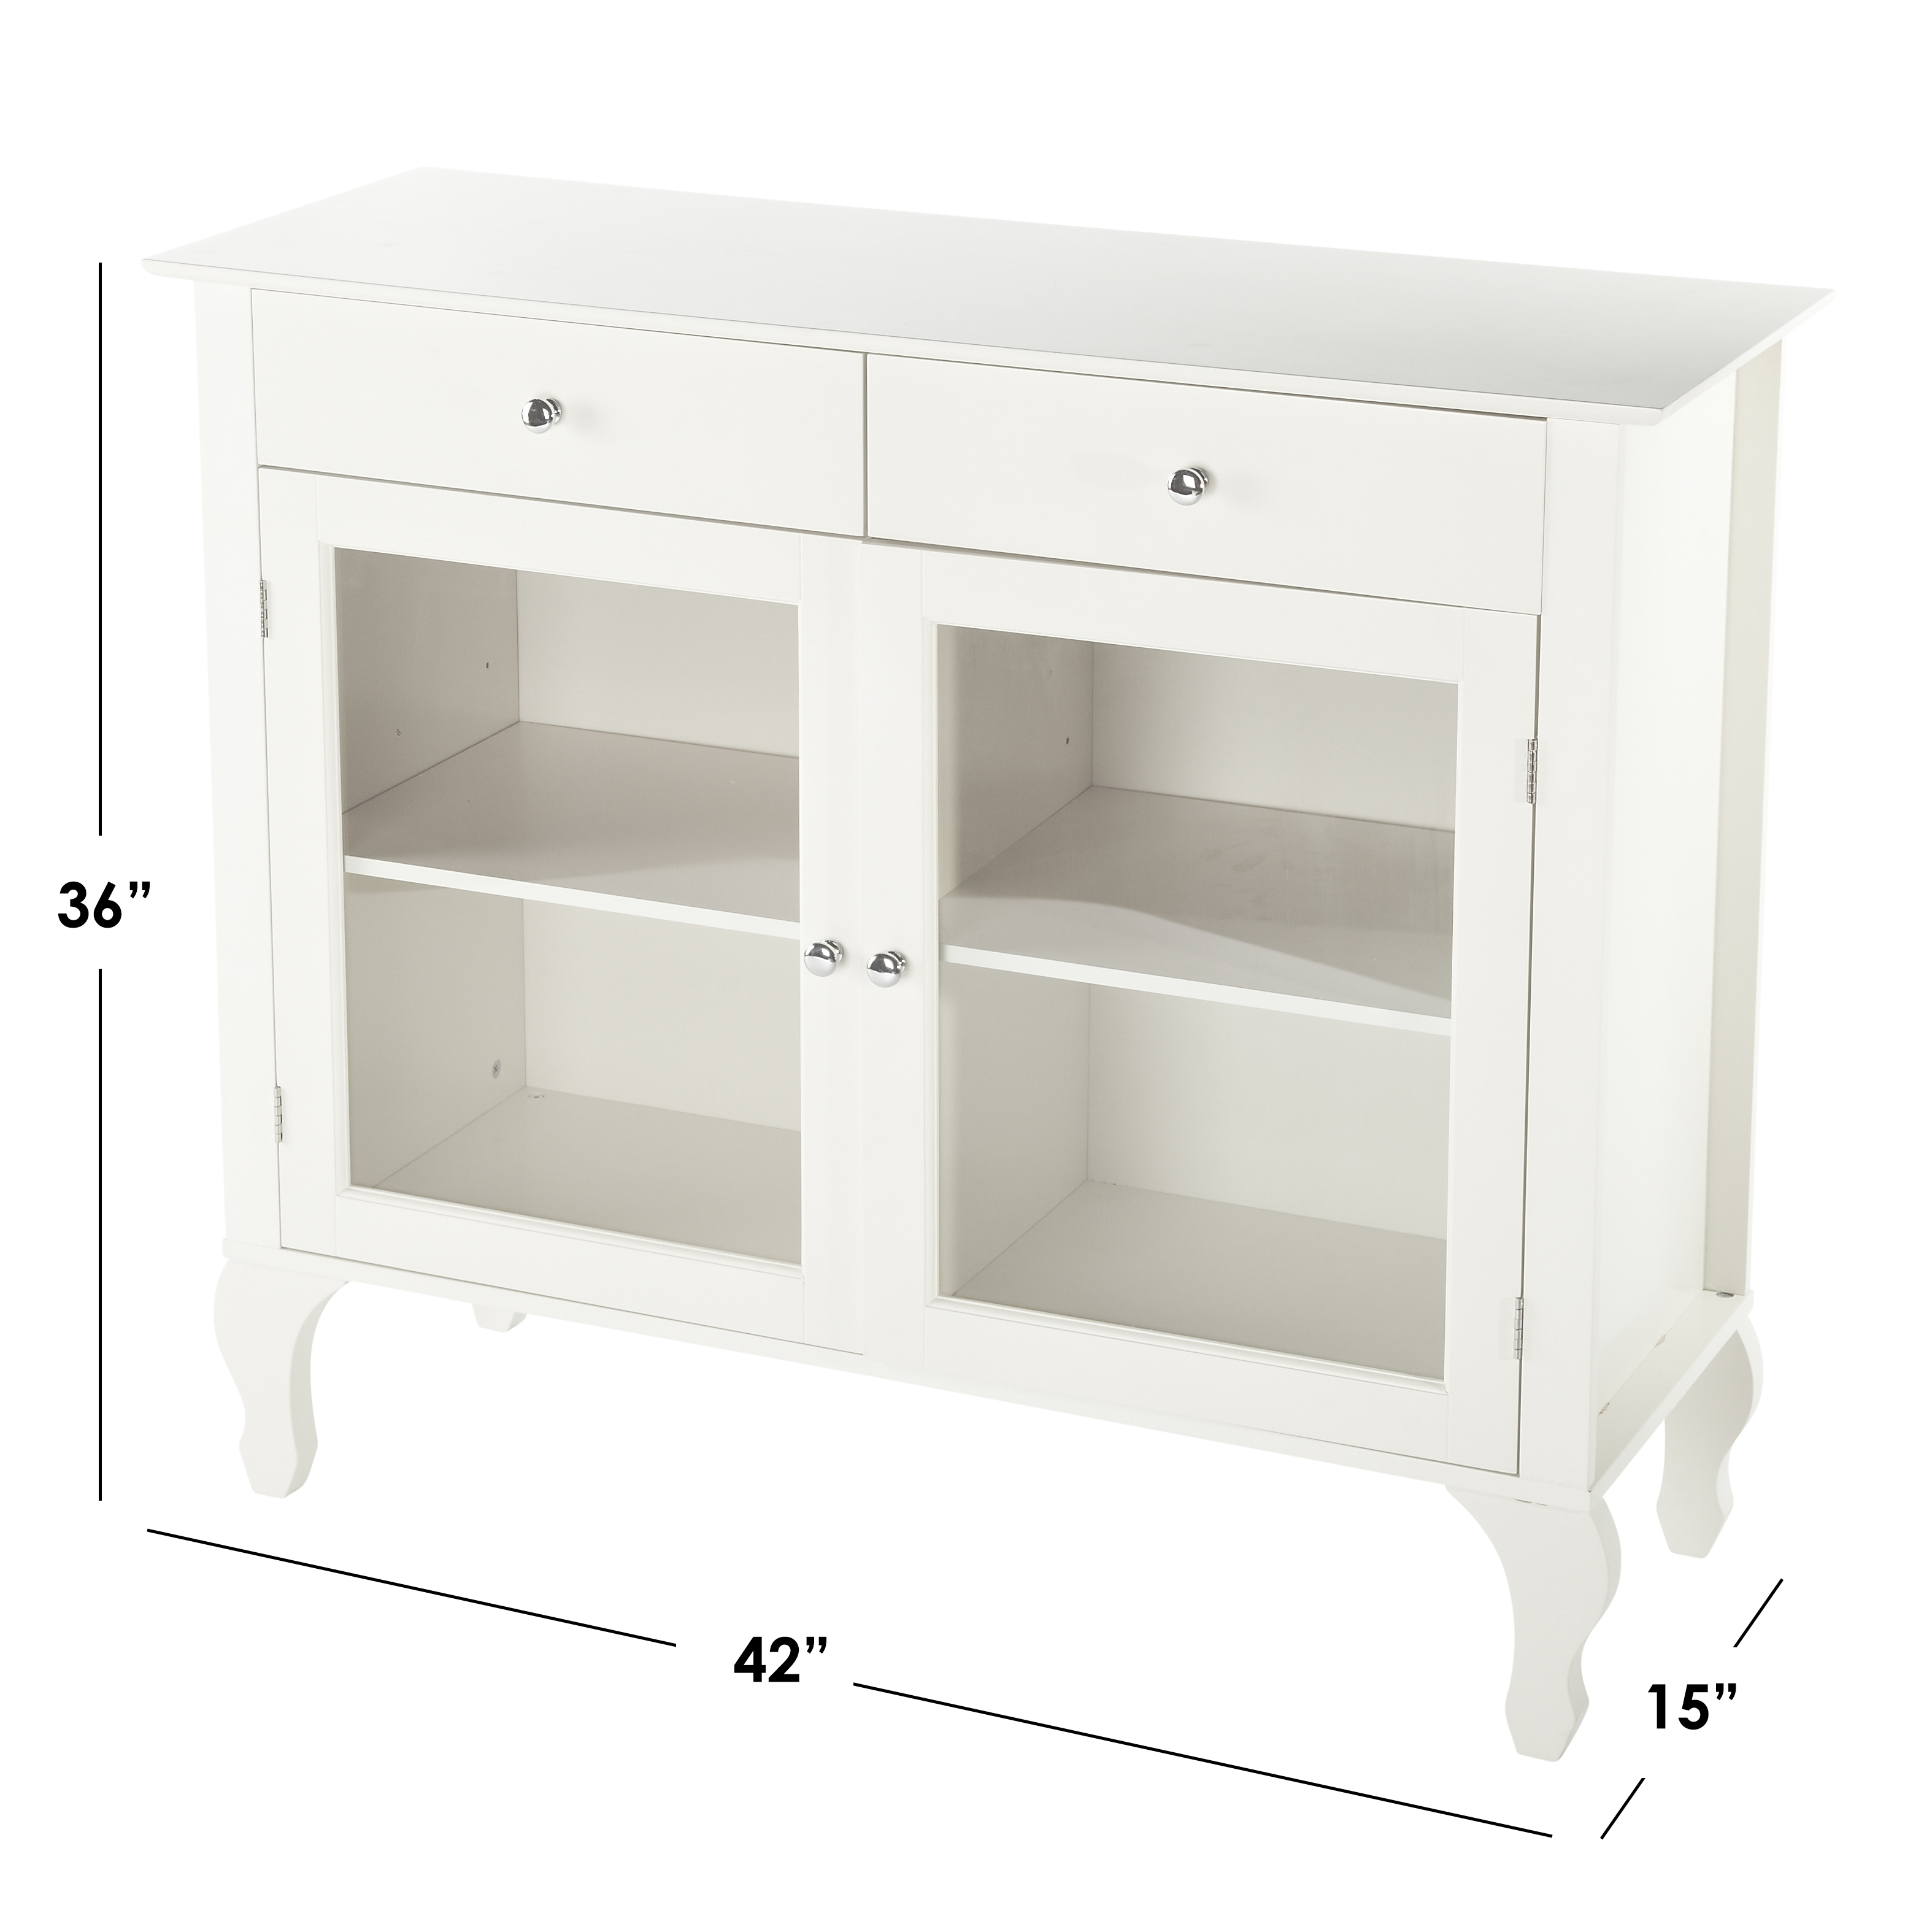 TMS Layla 2-Drawer Storage Buffet, Multiple Finishes - image 5 of 8